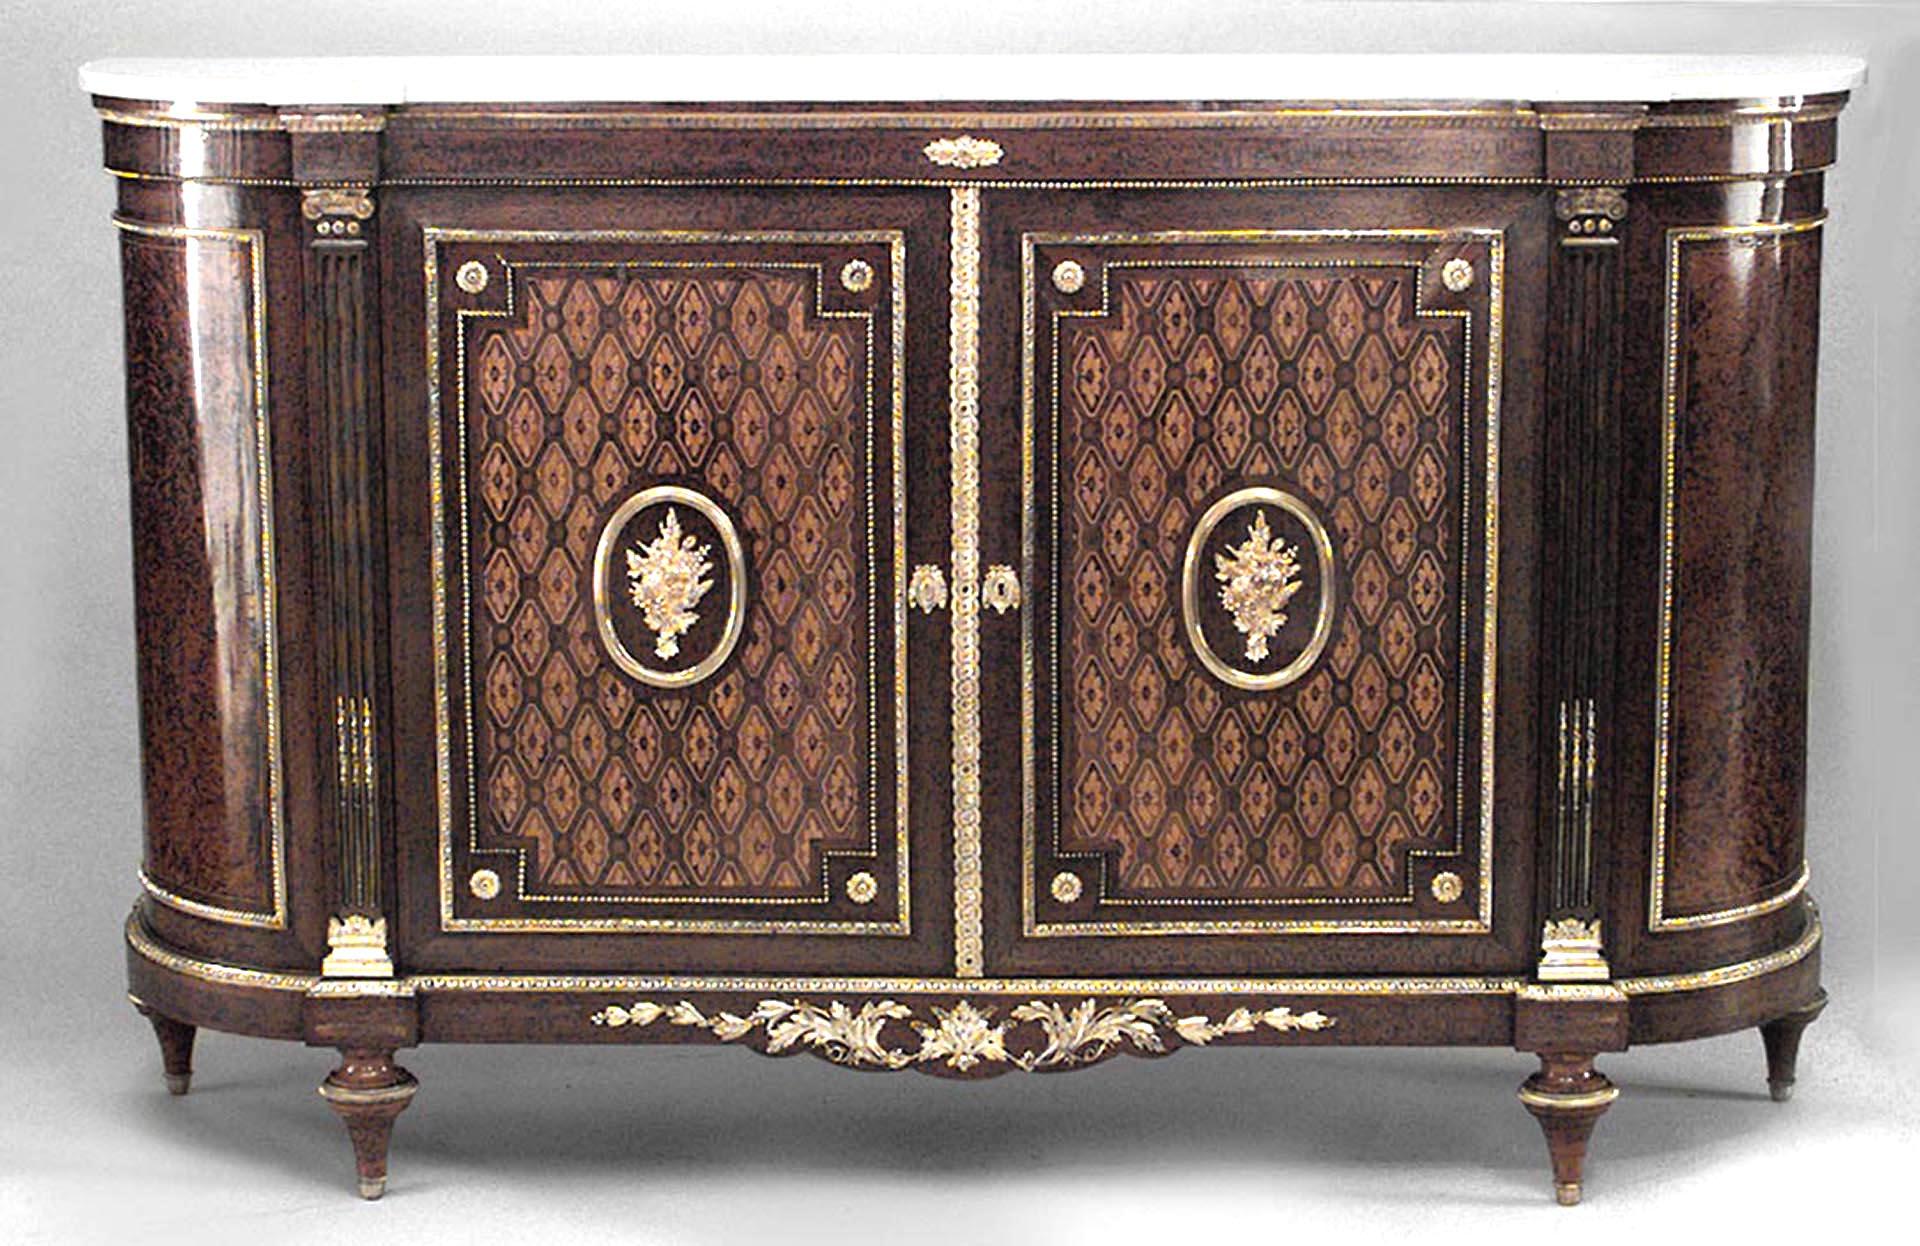 French Louis XVI-style (19th Century) inlaid 2 door sideboard cabinet with bronze trim and white marble top.
